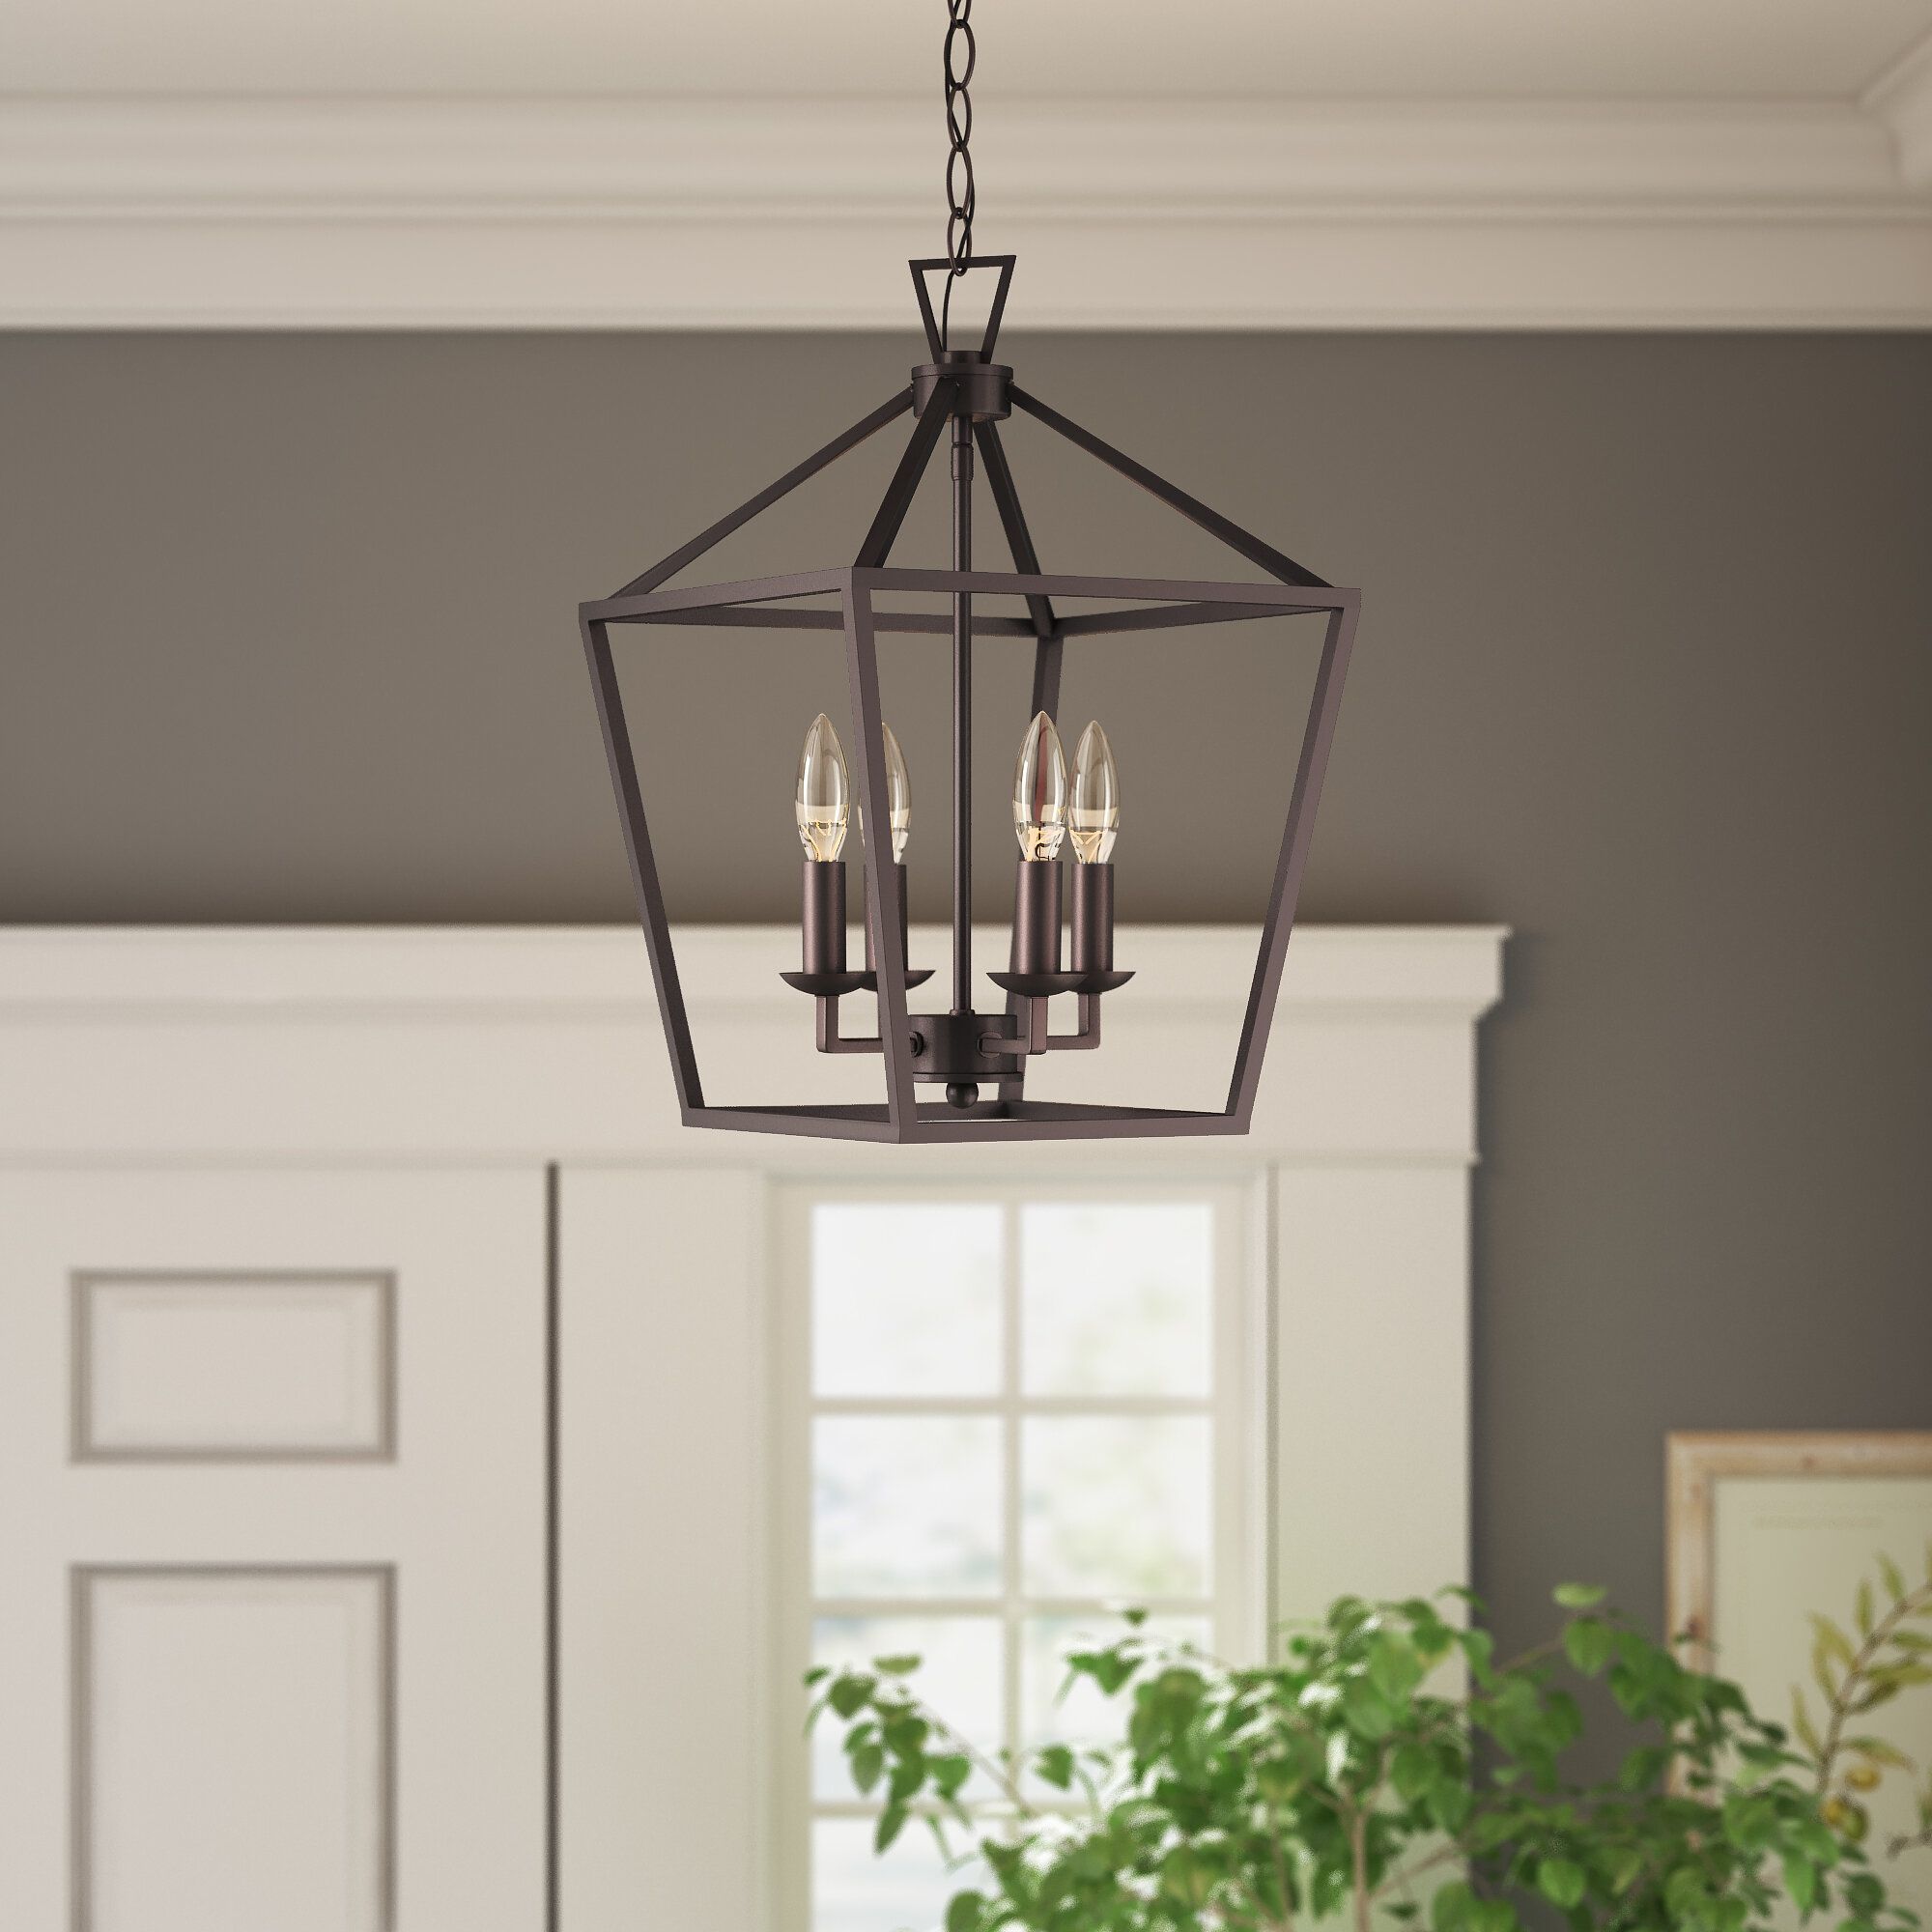 Farmhouse Chandeliers | Birch Lane Throughout Dailey 4 Light Drum Chandeliers (View 8 of 30)